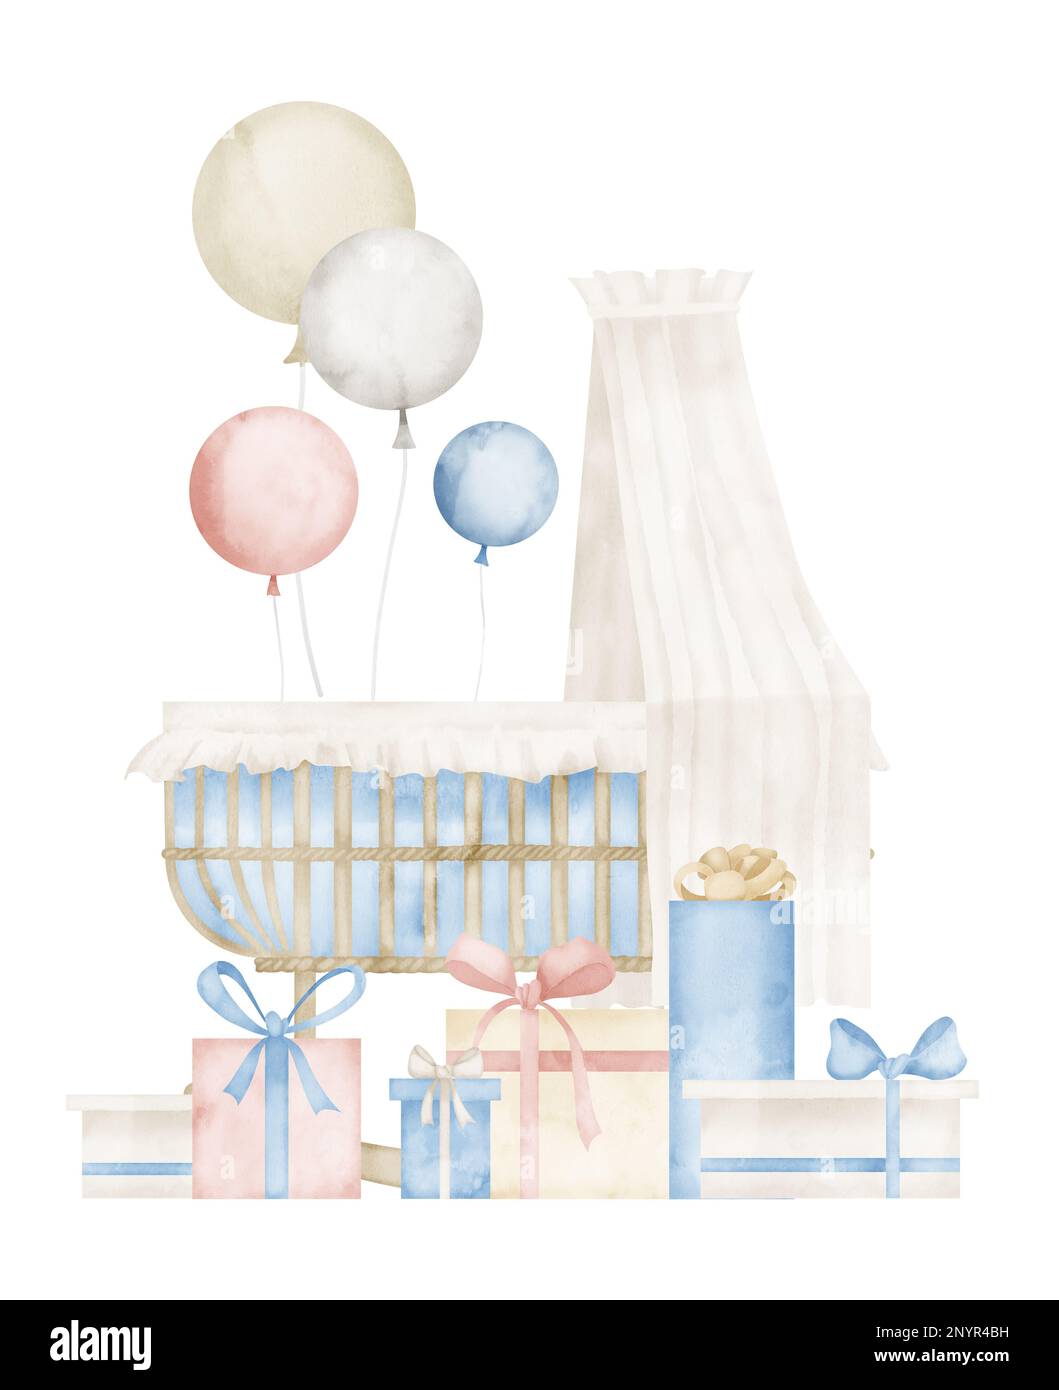 Baby Cradle with air Balloons and Presents in pastel blue and beige colors for newborn shower greeting cards or invitations. Hand drawn vintage illustration on isolated background for childish design. Stock Photo